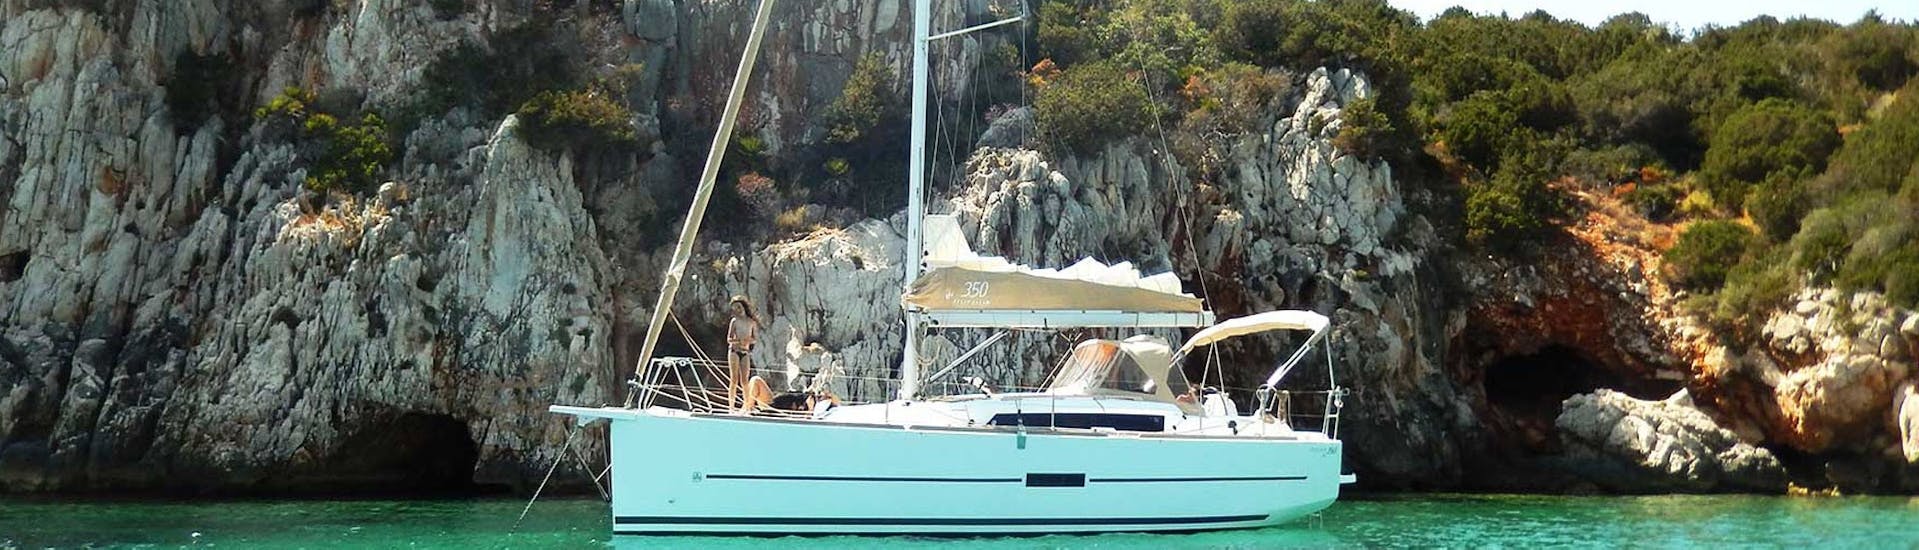 The sailing boat XchéNo during the Private Sailing Boat Trip to the Baia di Alghero with Snorkeling & Lunch.